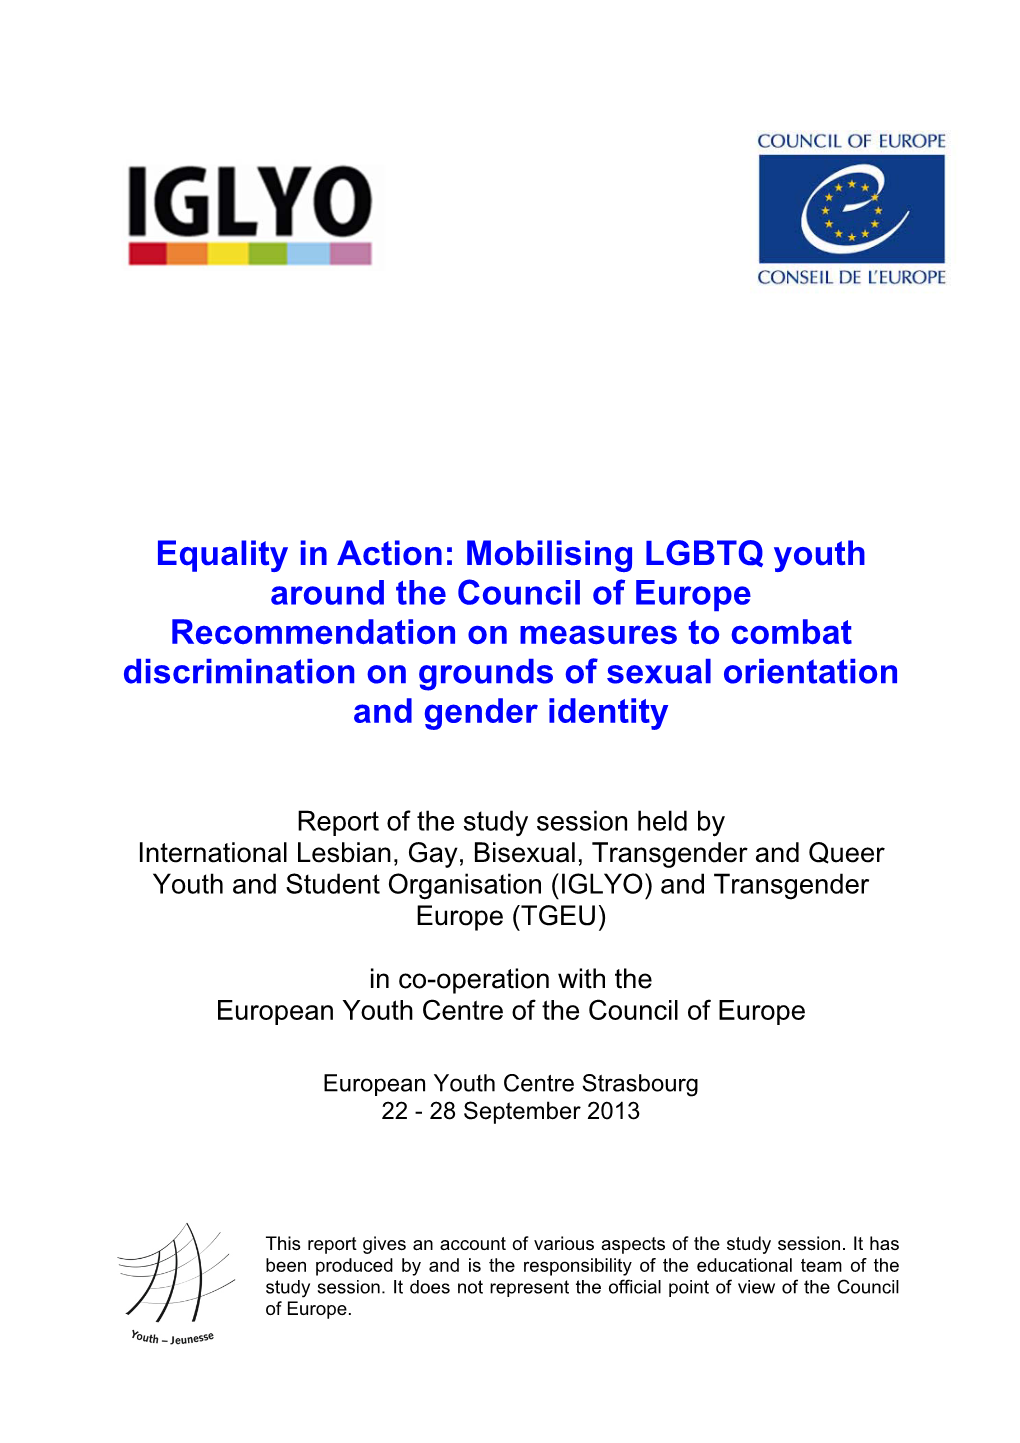 Equality in Action: Mobilising LGBTQ Youth Around the Council of Europe Recommendation on Measures to Combat Discrimination on G